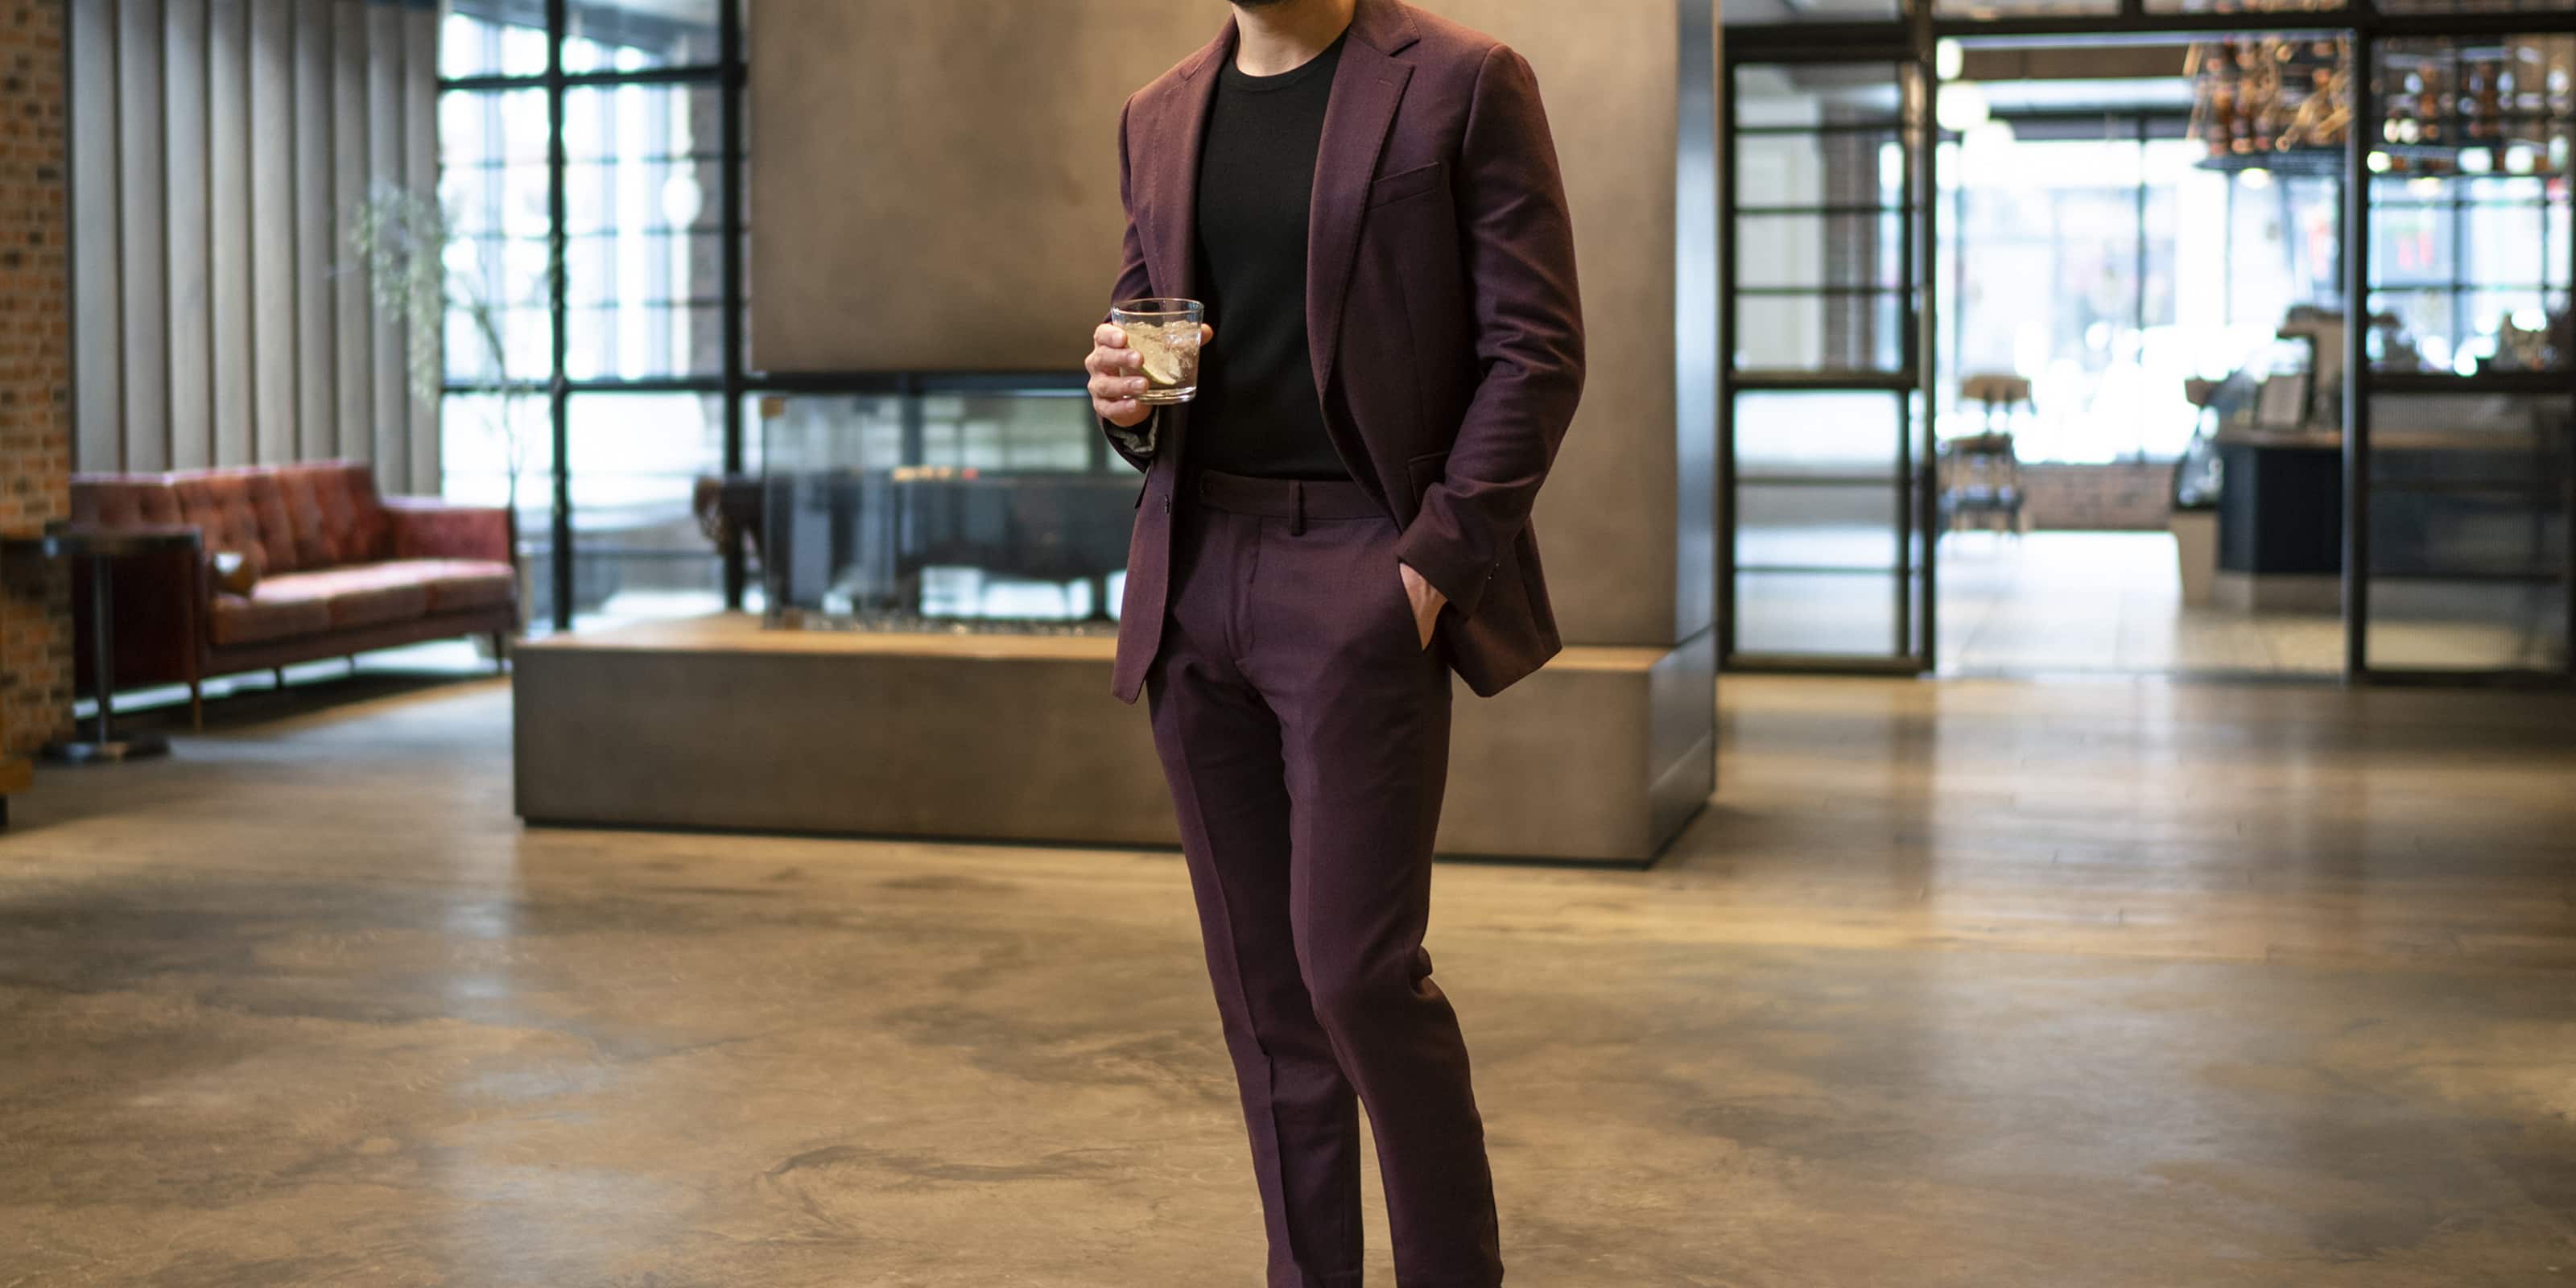 The featured image is a model wearing a burgundy suit.